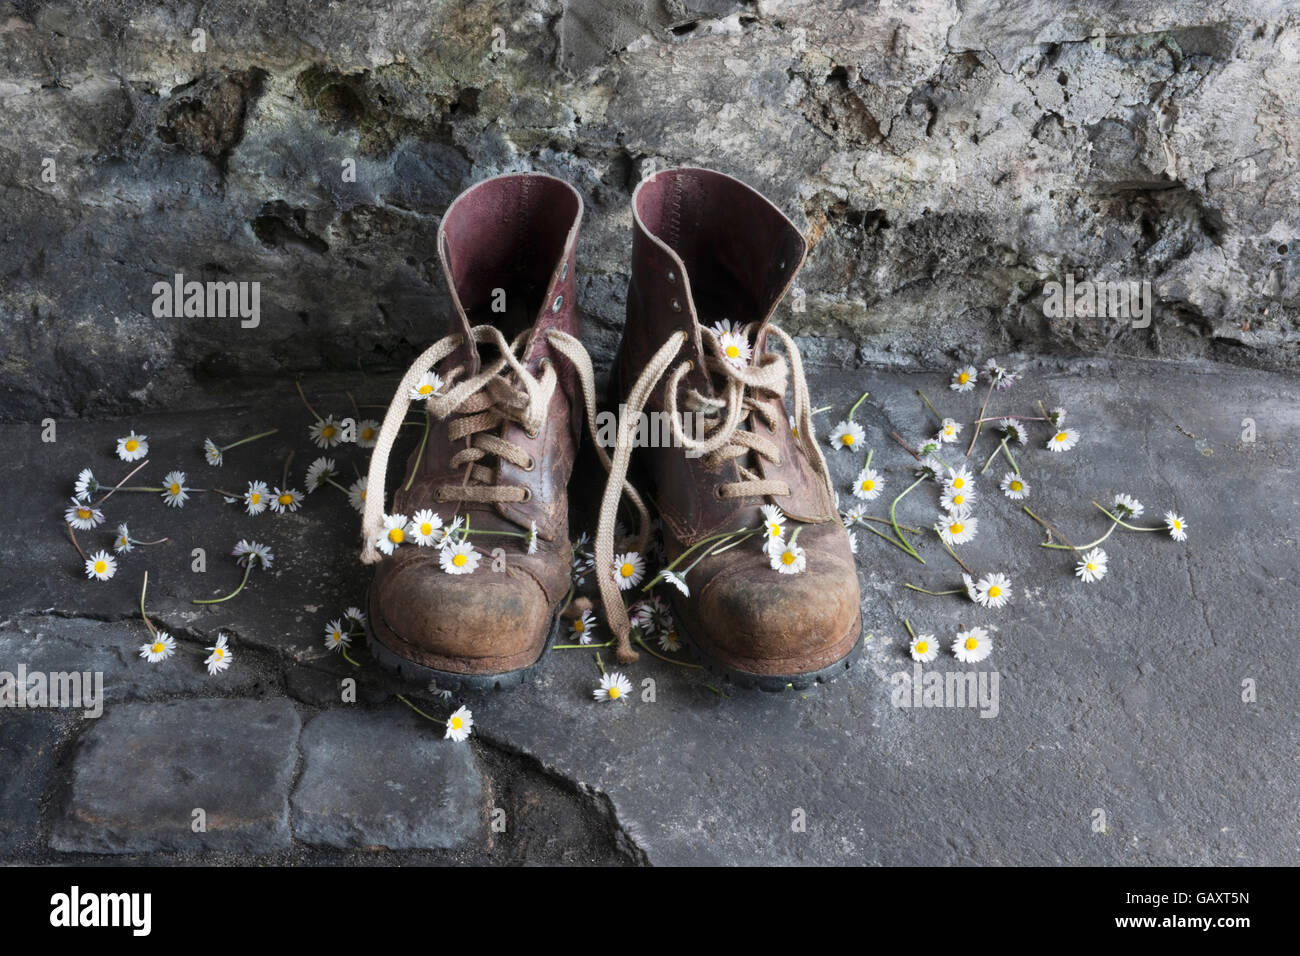 A pair of old leather work boots on workshop floor with daisy flowers. Stock Photo